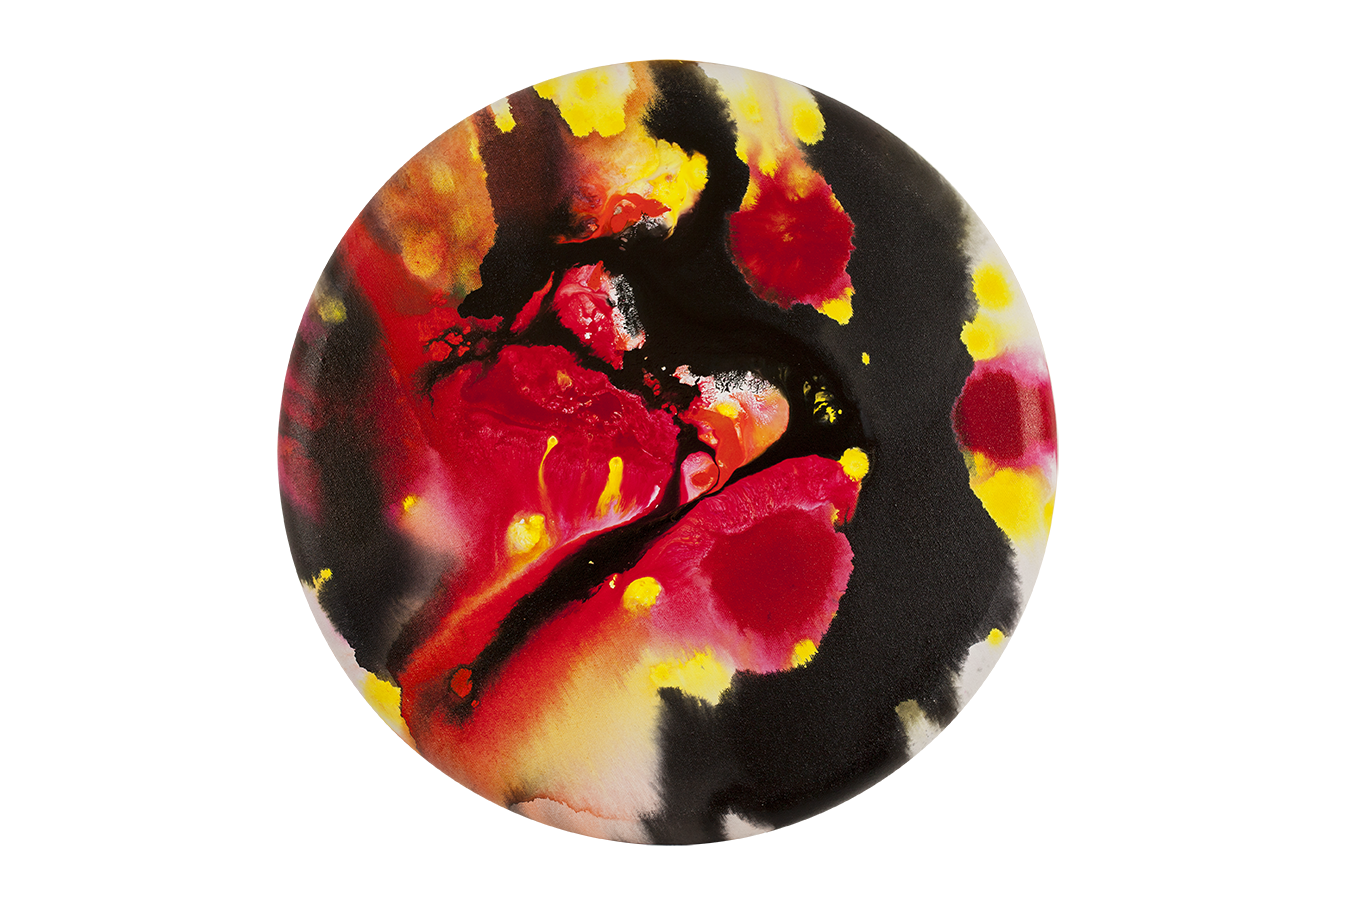 ©2017 Alicia R Peterson, *Fire Circle*. Acrylic on 20-inch diameter convex canvas. Photographer: Peter Scheer.